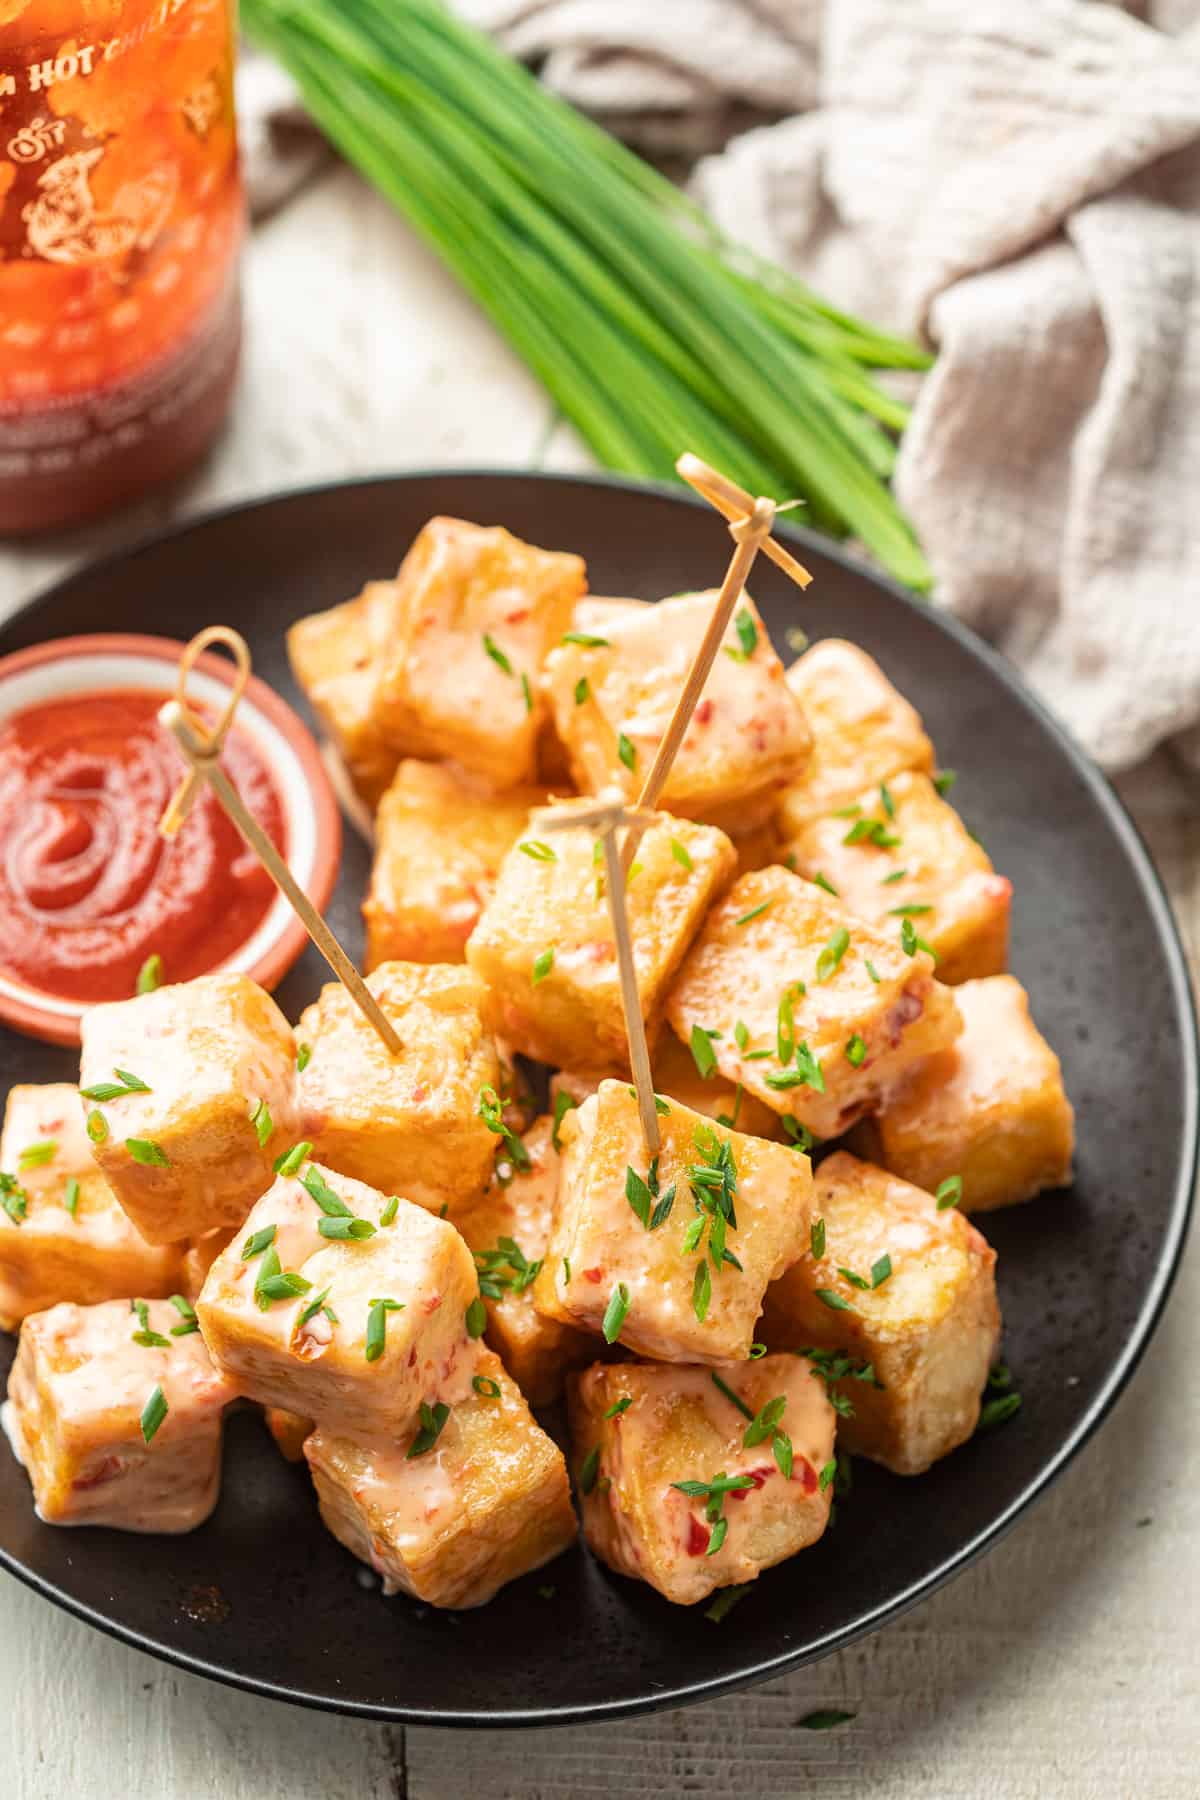 Plate of Bang Bang Tofu with skewers in some of the pieces.